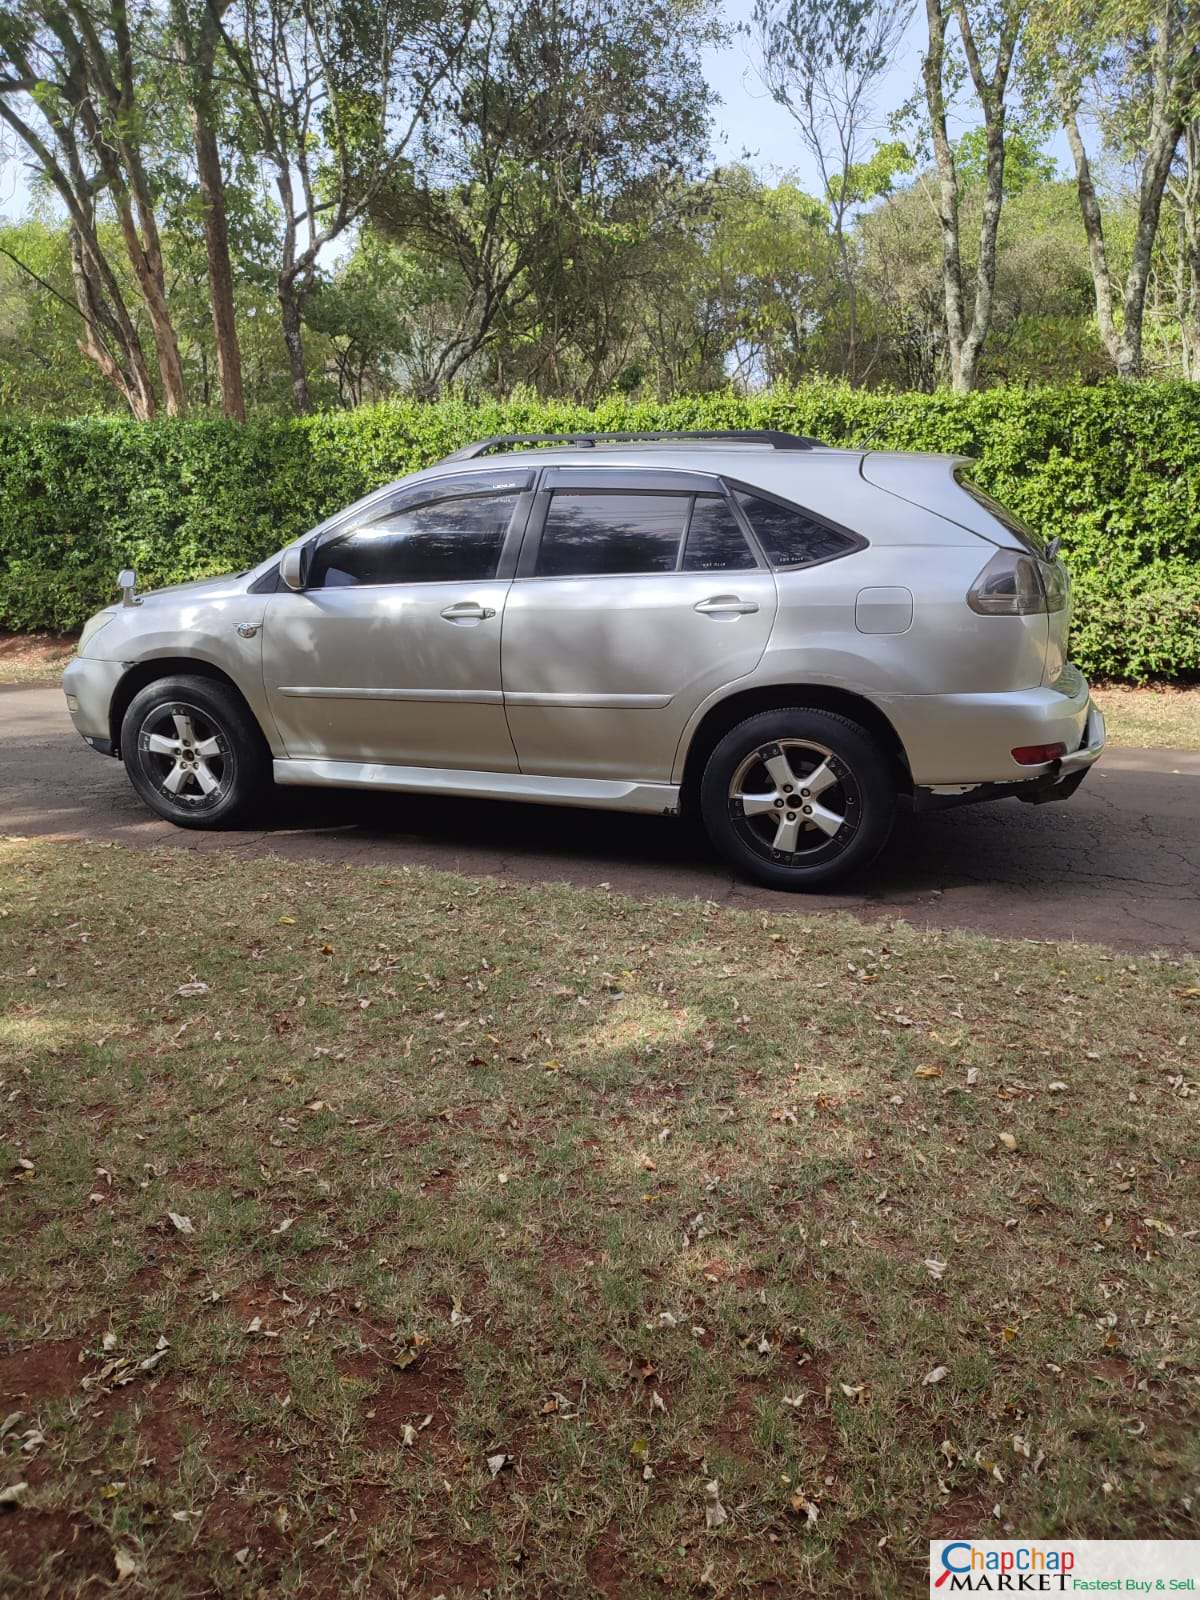 Toyota Harrier QUICK SALE 699k You Pay 30% Deposit 70% installments Trade in OK EXCLUSIVE